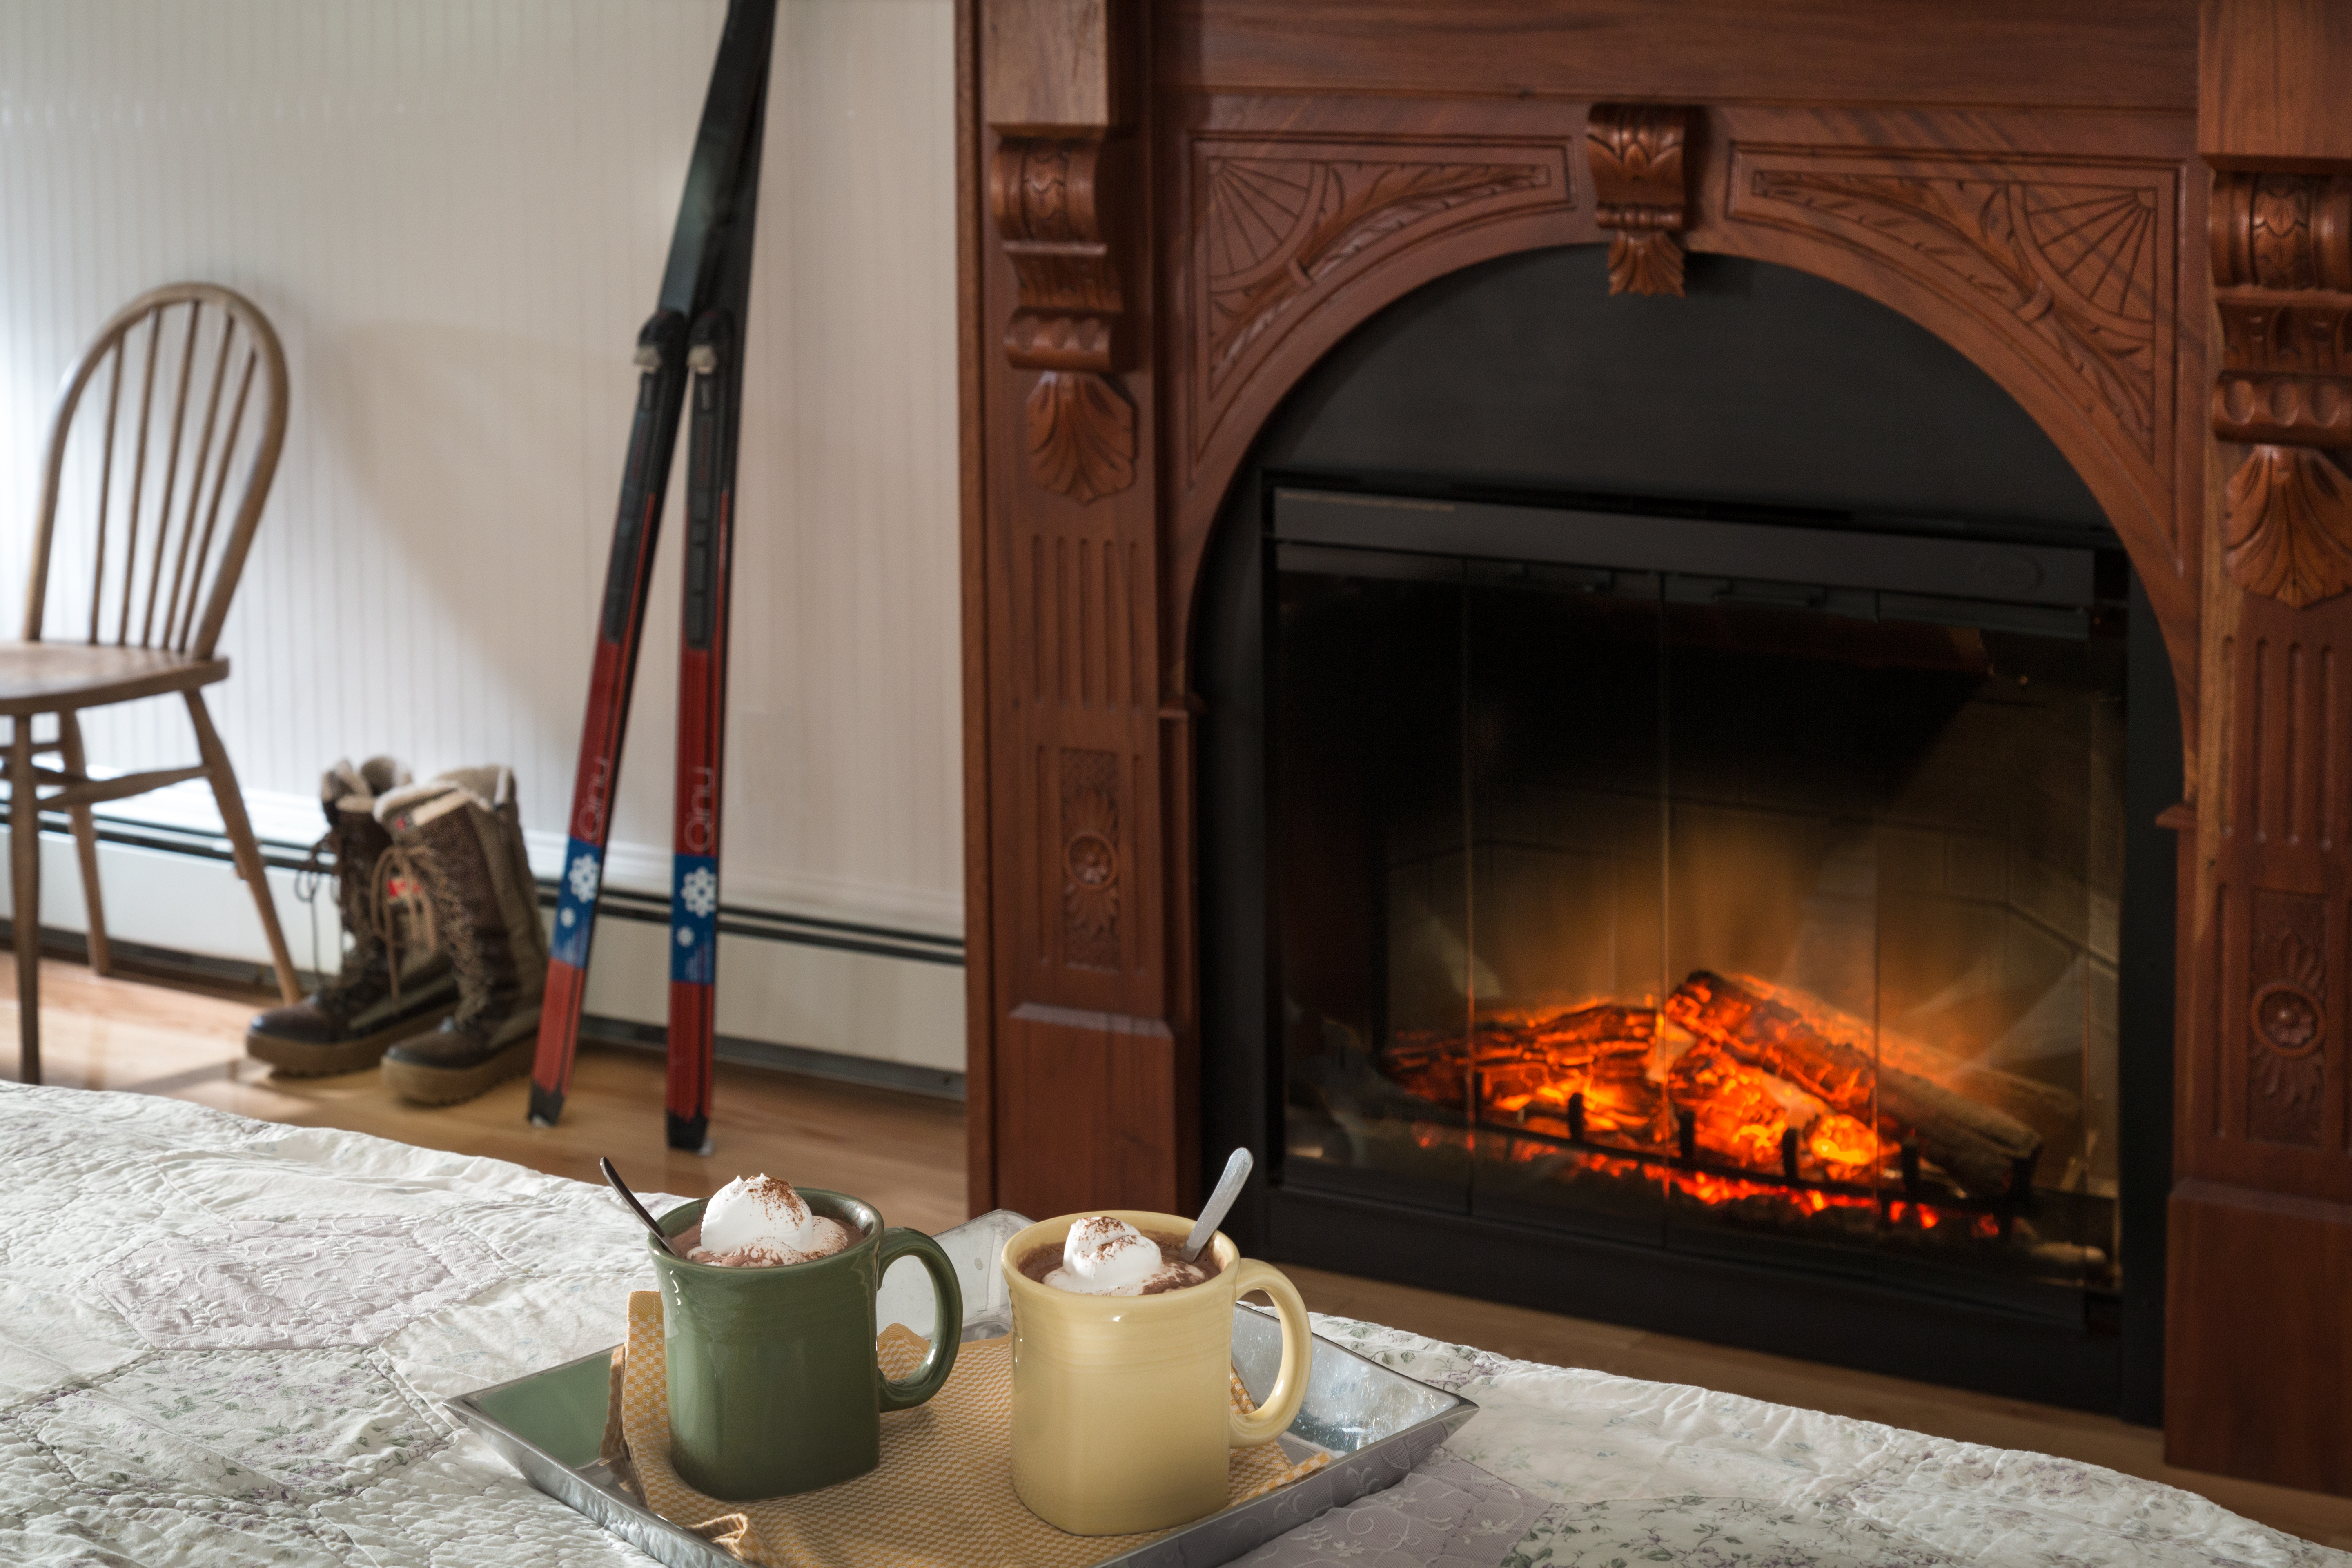 a tray on a bed with two mugs of hot cocoa, a fireplace in teh background with orange flames and a pair cross country skis leaning against the white wall.